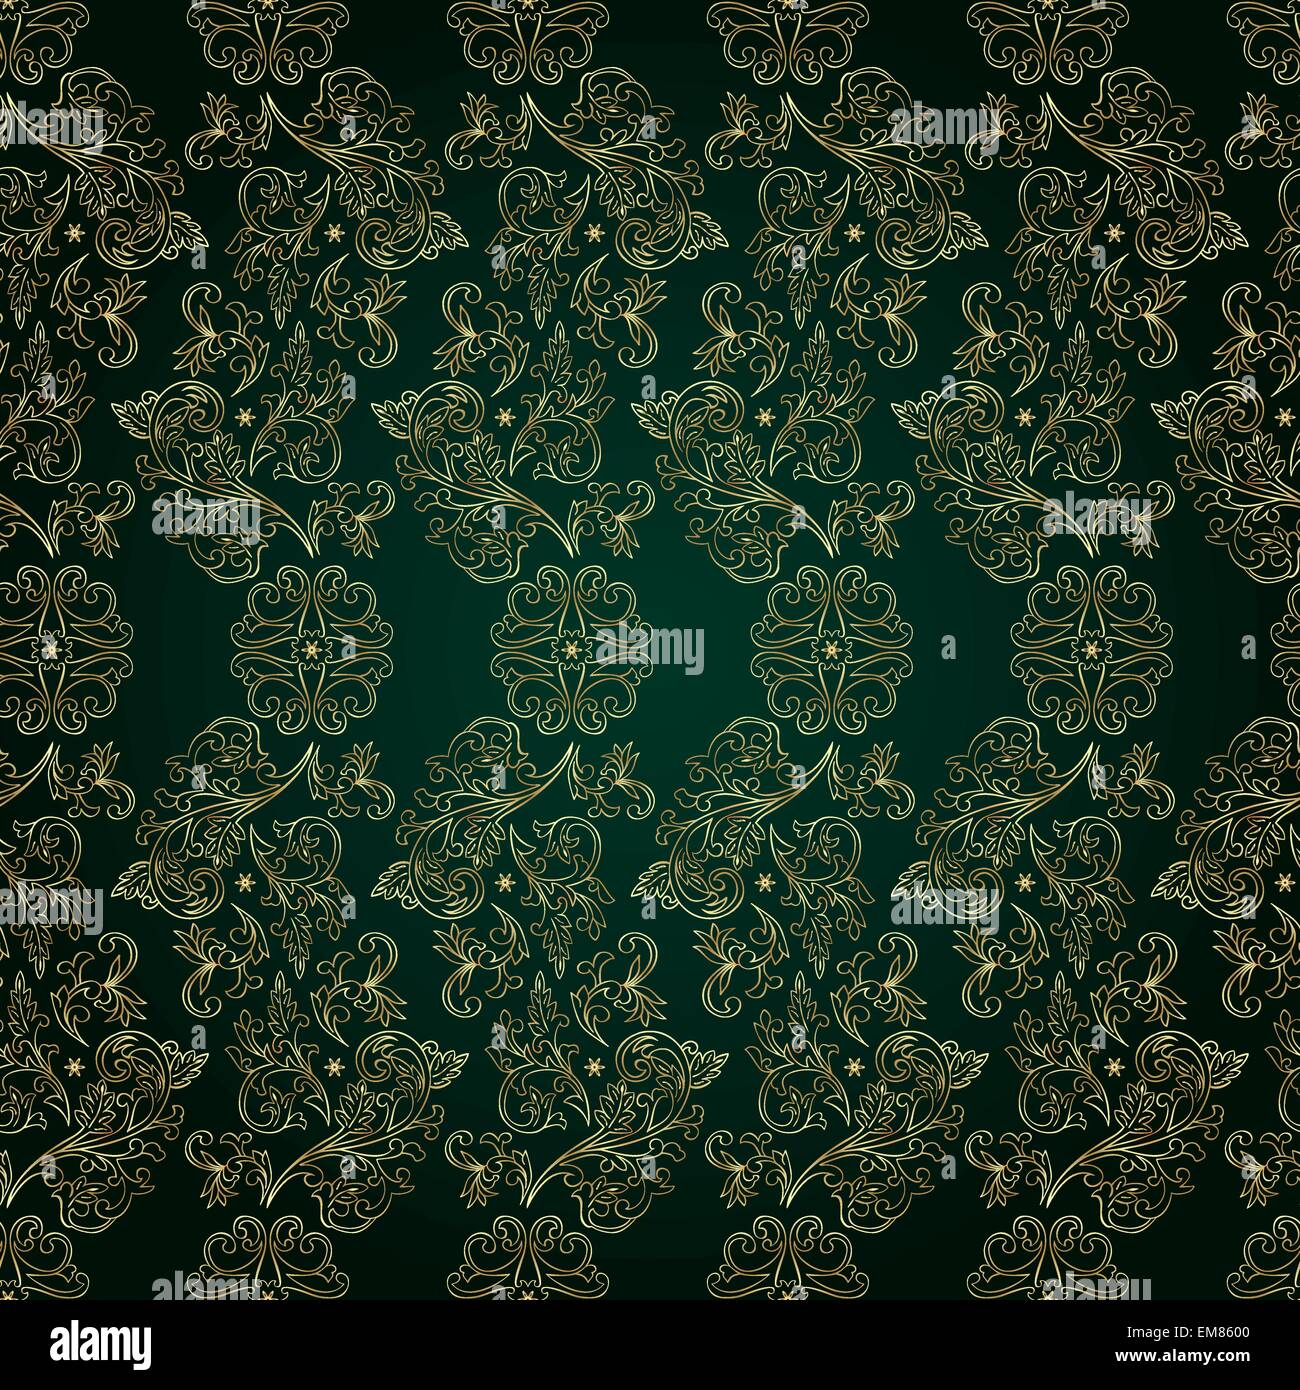 Floral vintage seamless pattern on green background Stock Vector